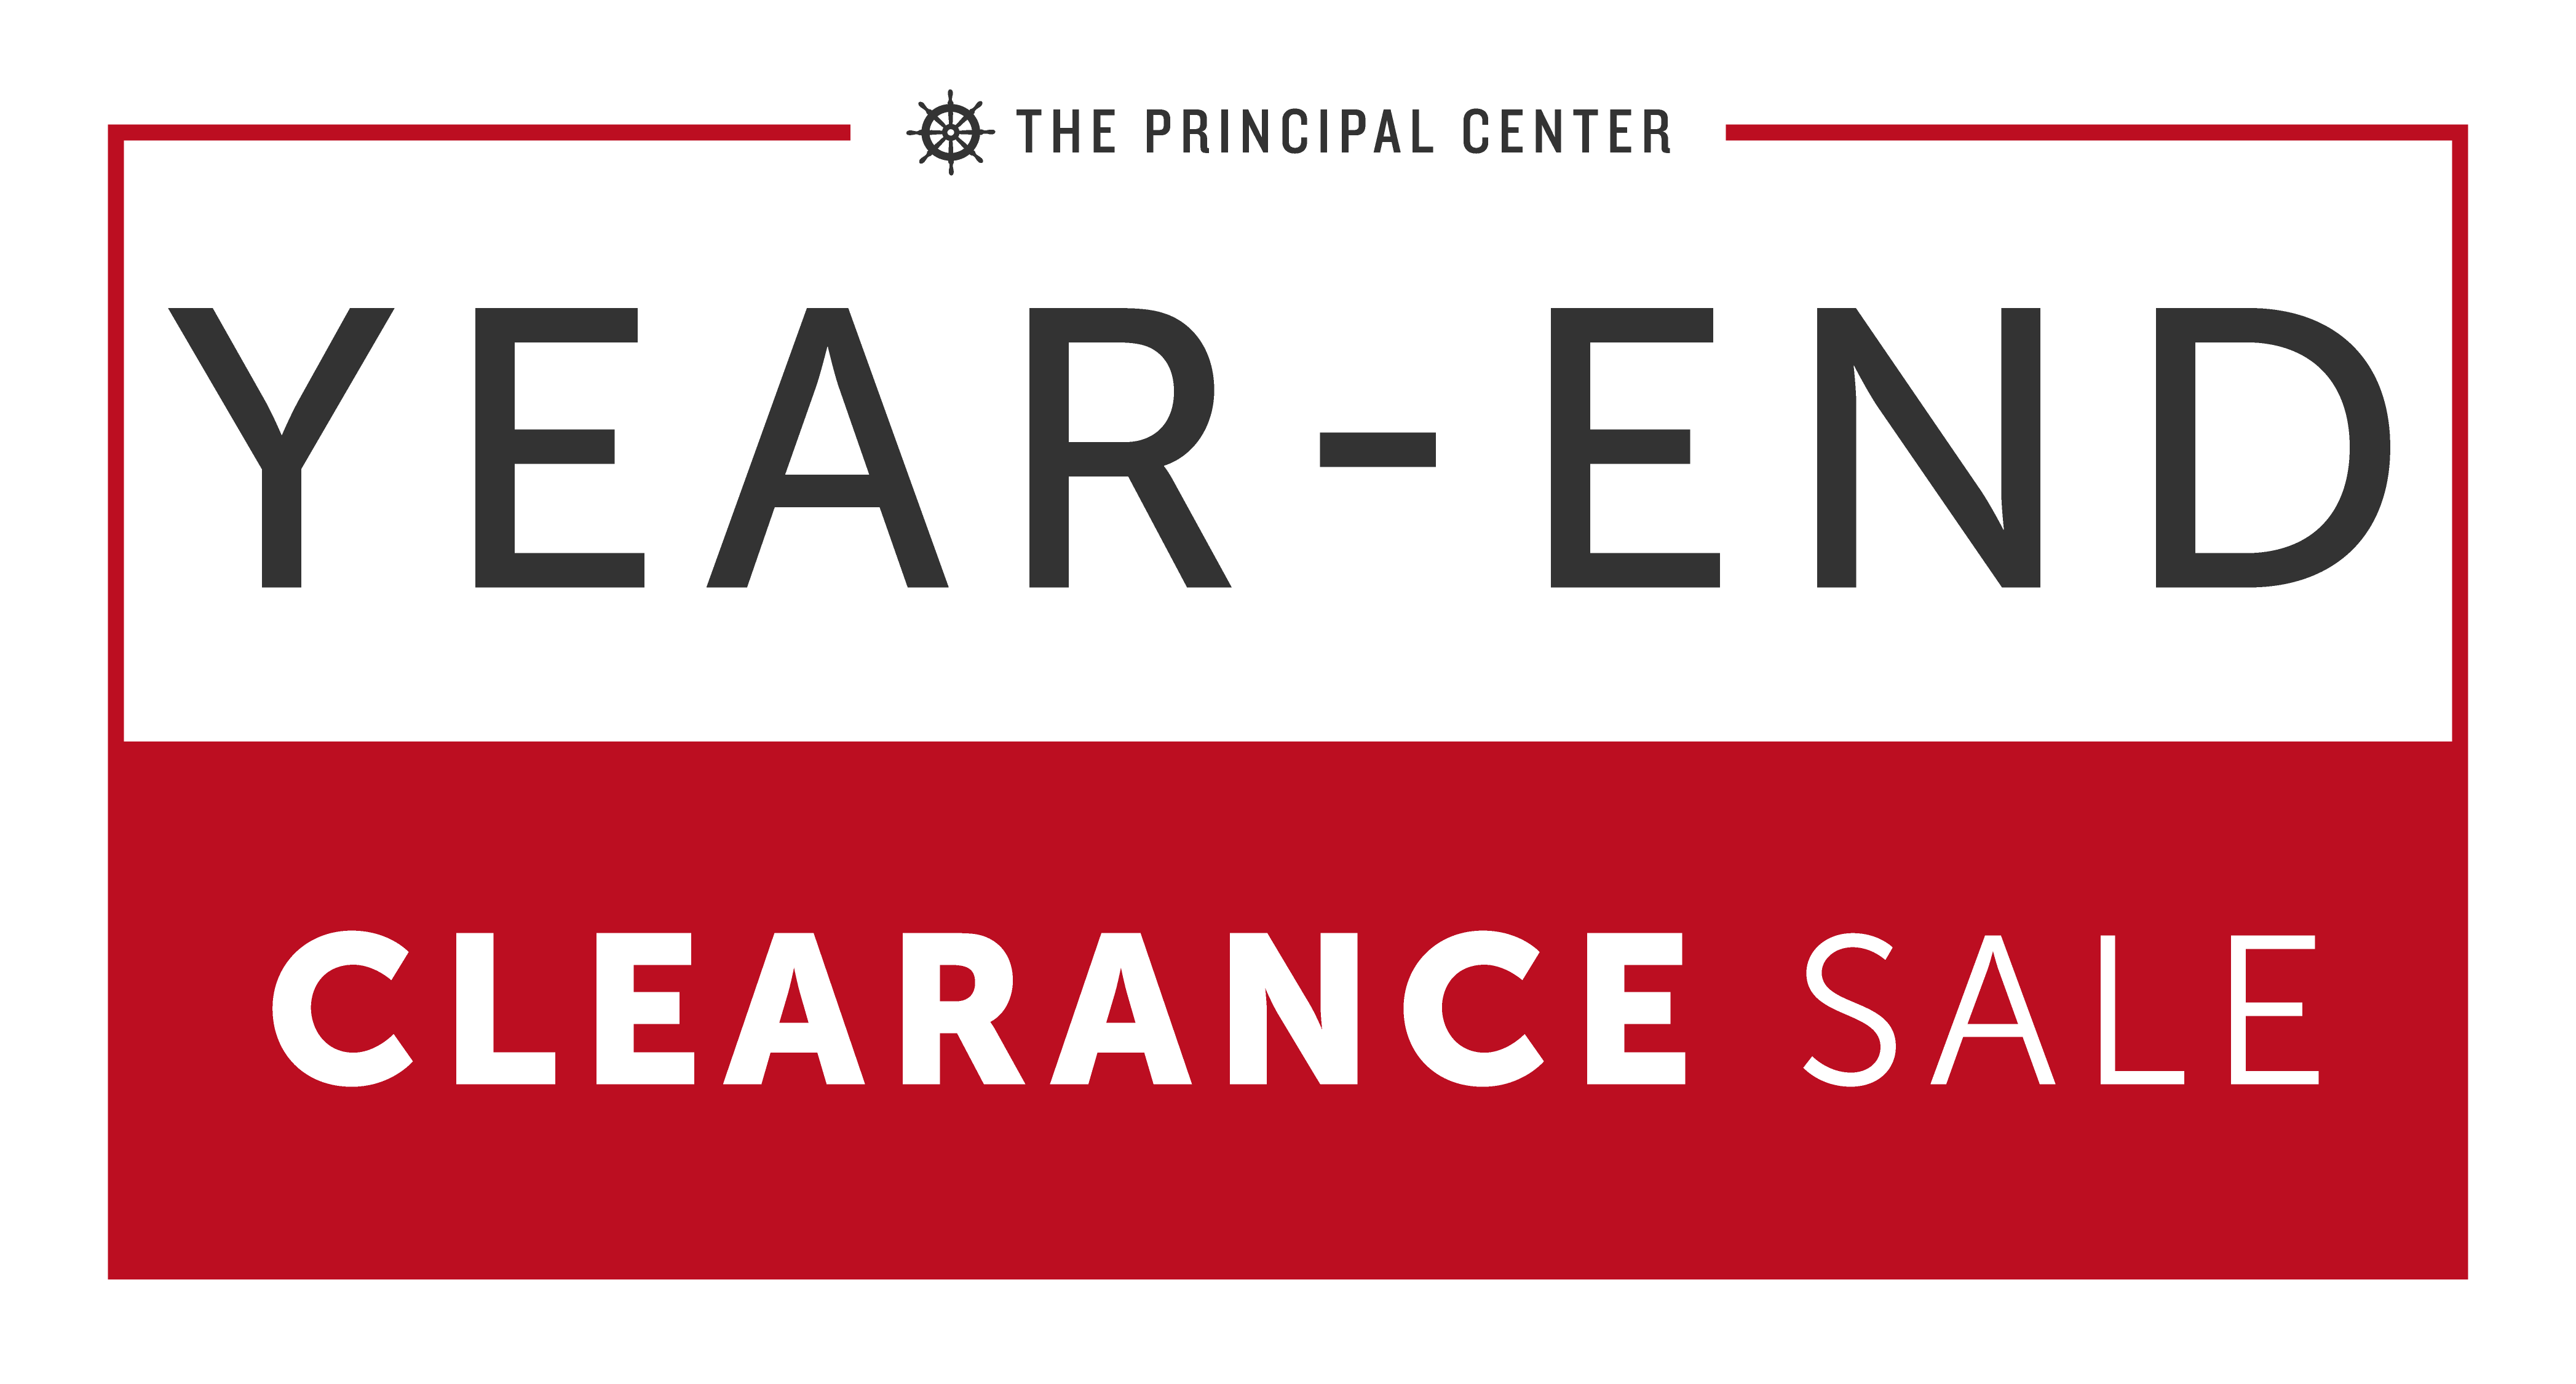 DEPRECATED: Year-End Clearance Sale 2021 - The Principal Center